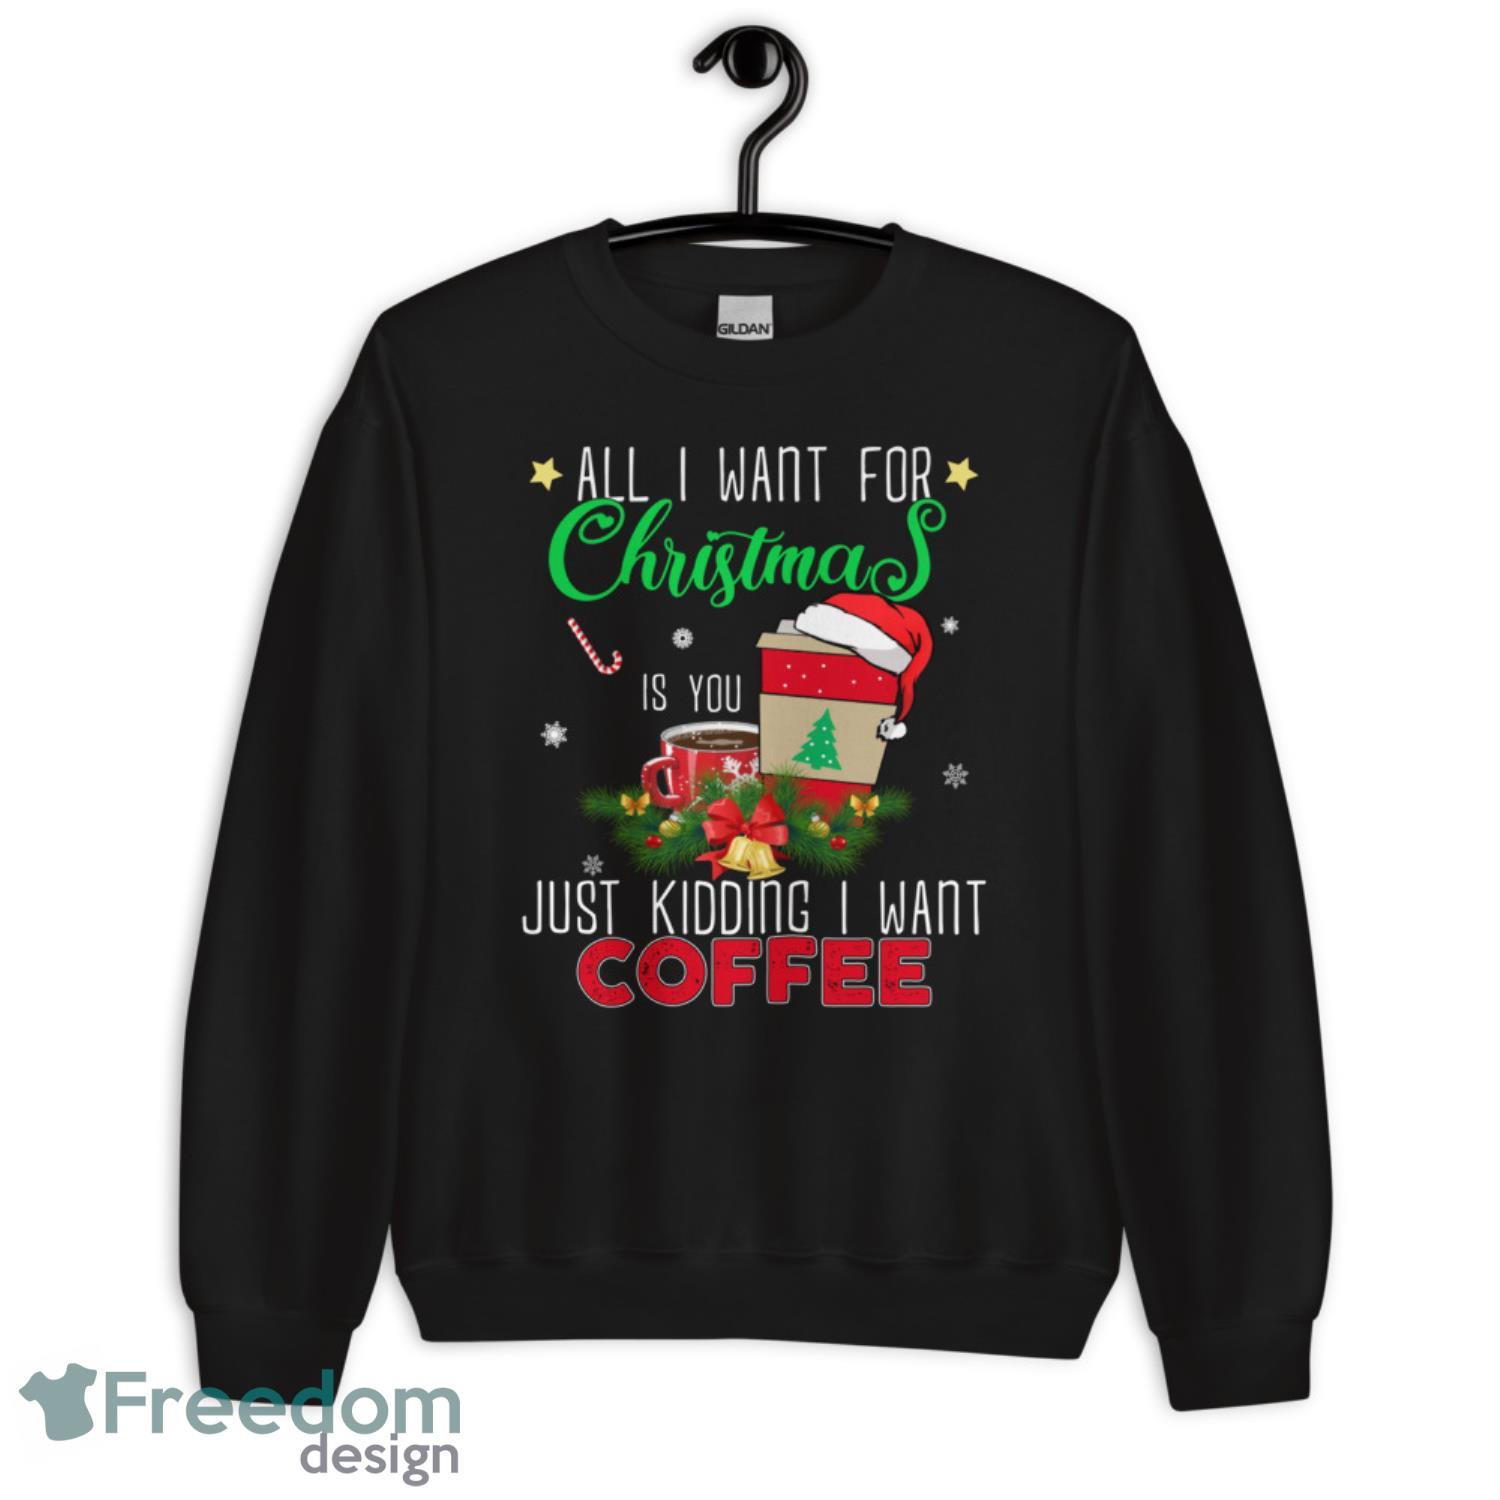 All I want For Christmas Is You Just Kidding I Want Coffee Christmas Swater - G185 Crewneck Sweatshirt